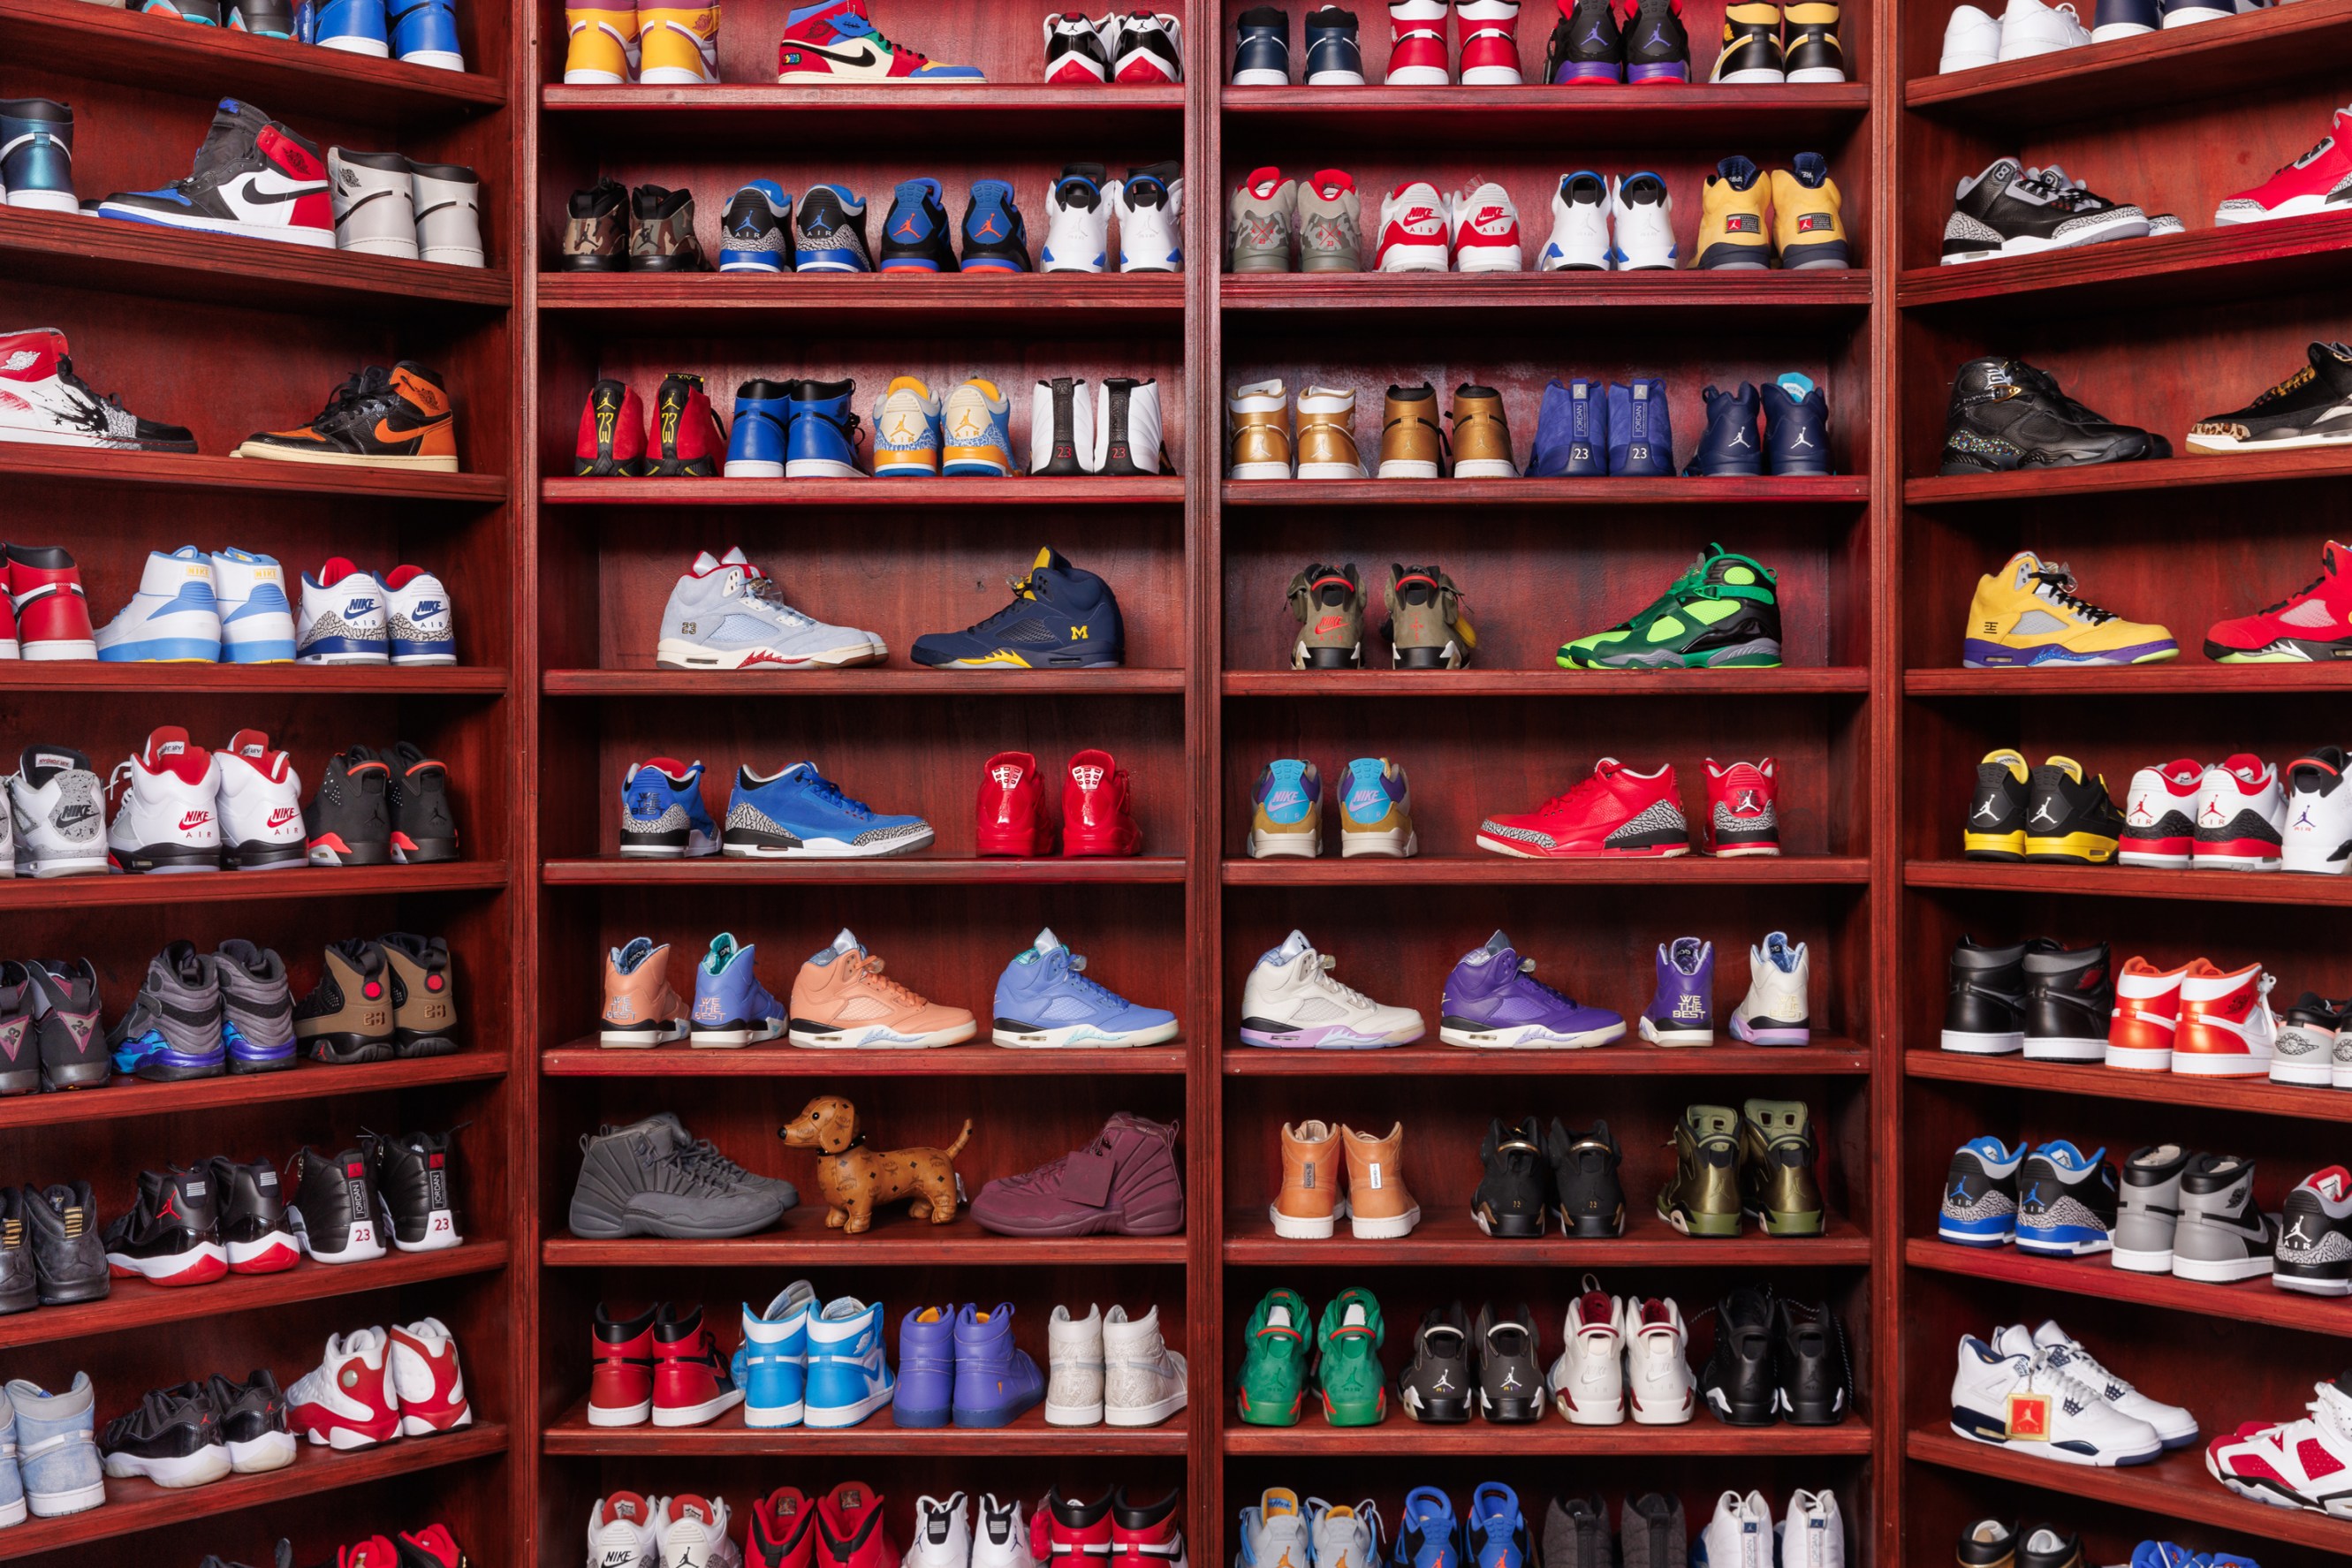 Rows of wooden closet shelves filled with DJ Khaled's shoe collection. 